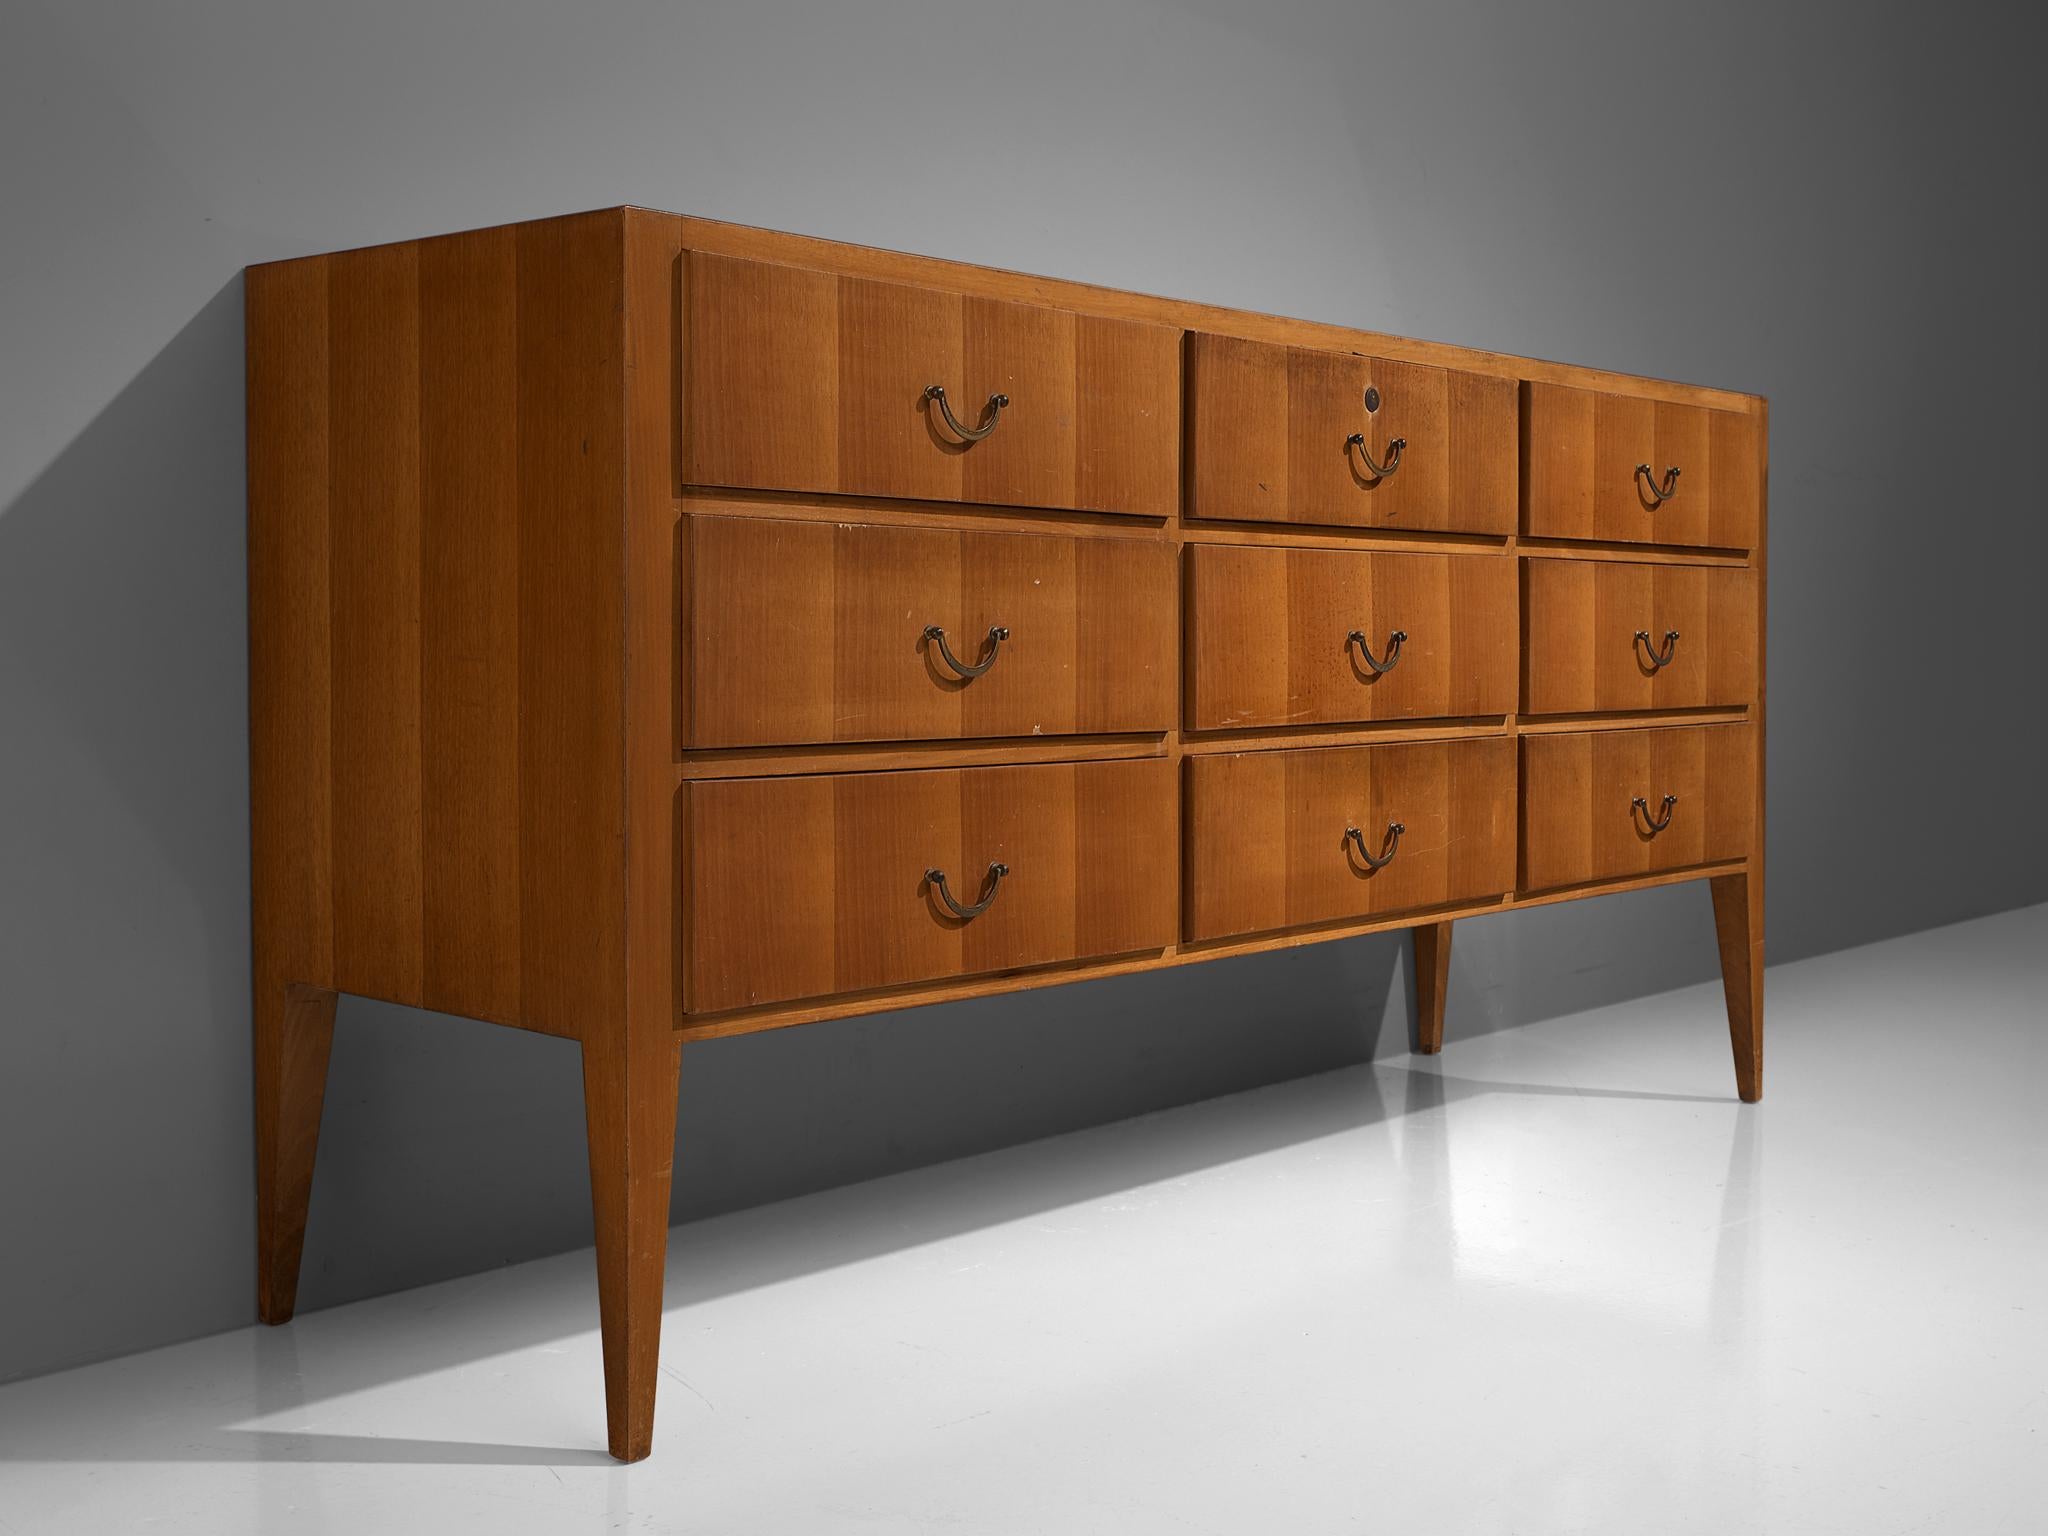 Italian Cabinet with Drawers in Walnut and Brass, Italy, 1950s